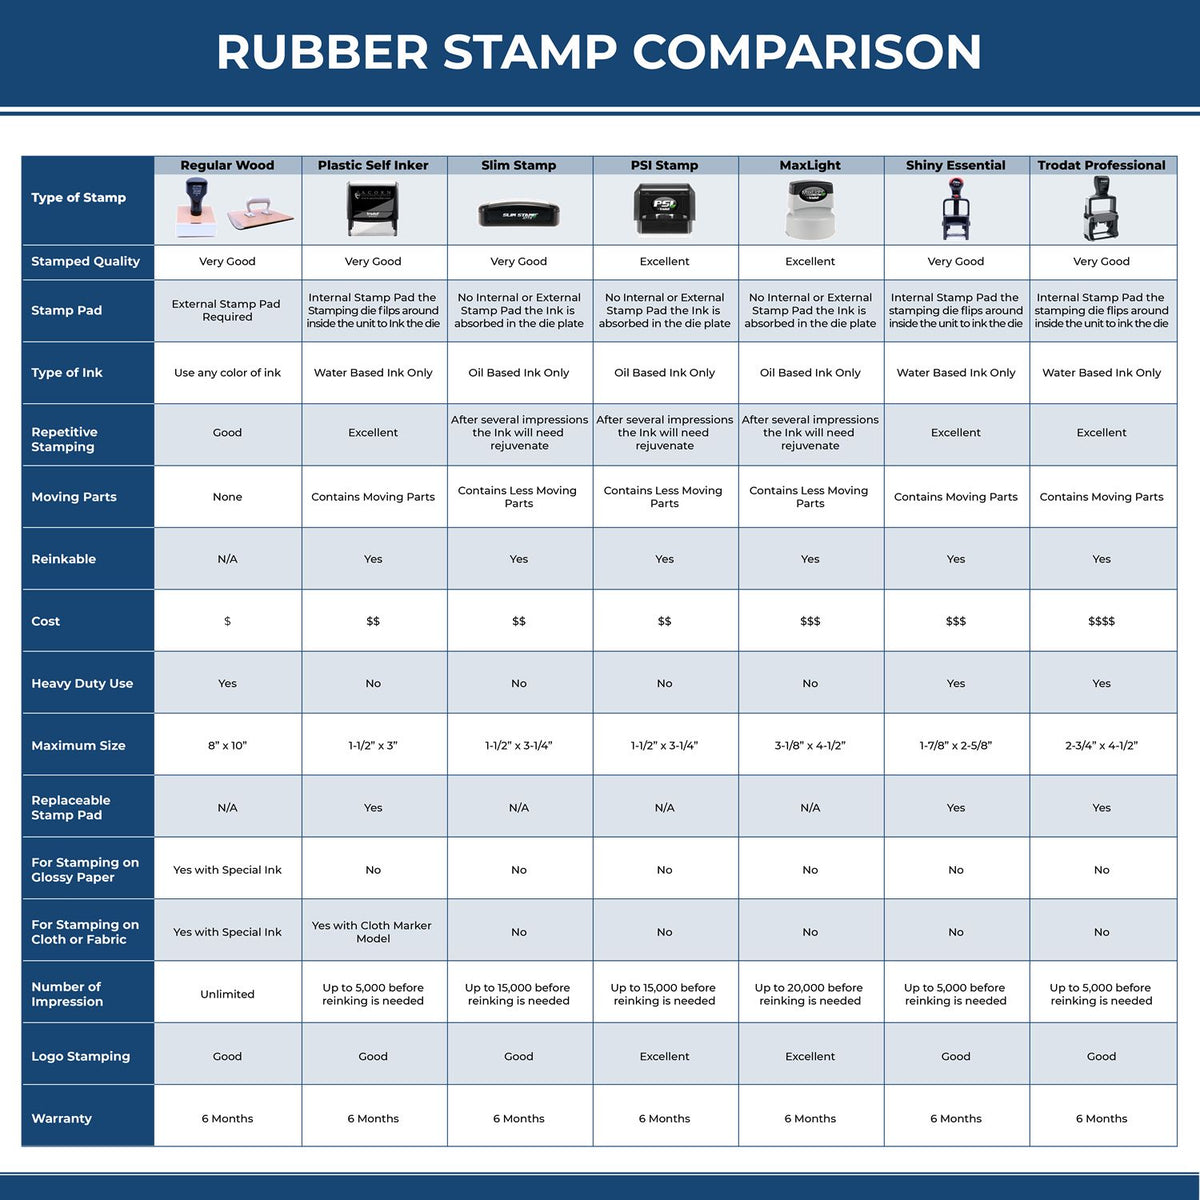 Large Surface Rubber Stamp 5563R Rubber Stamp Comparison